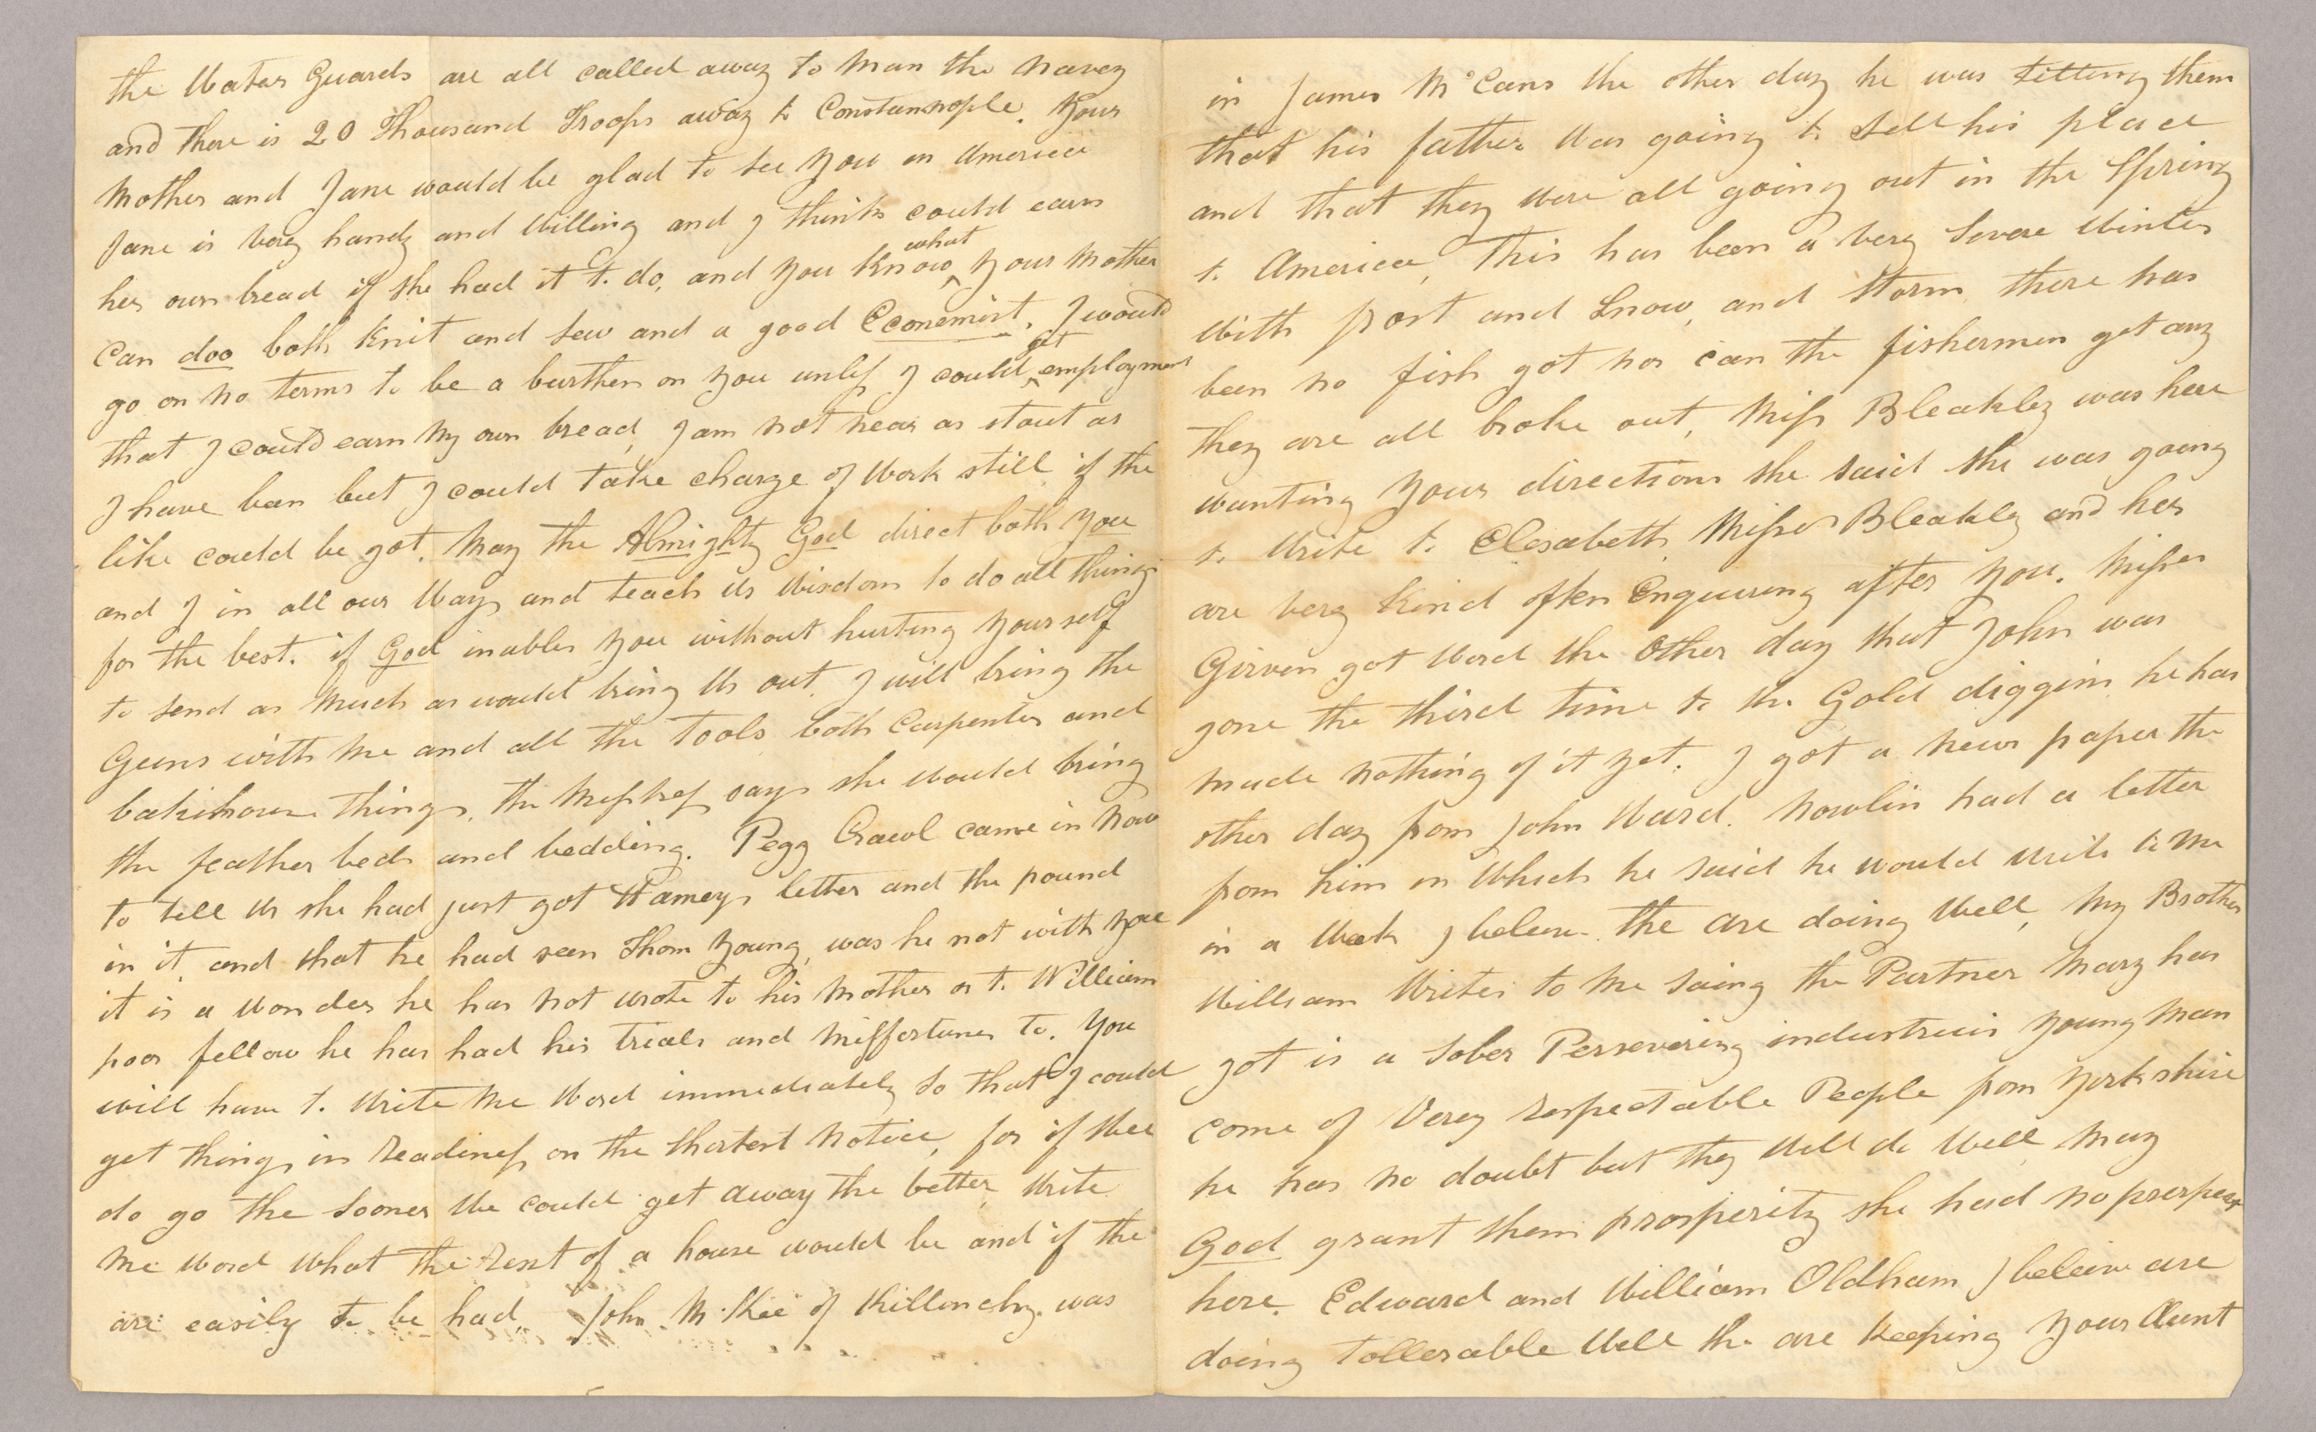 Letter. R[obert] B[rownlee], Killyleagh, Ireland, to "My Dear Johny" [John E. Brownlee], n. p., Pages 2-3